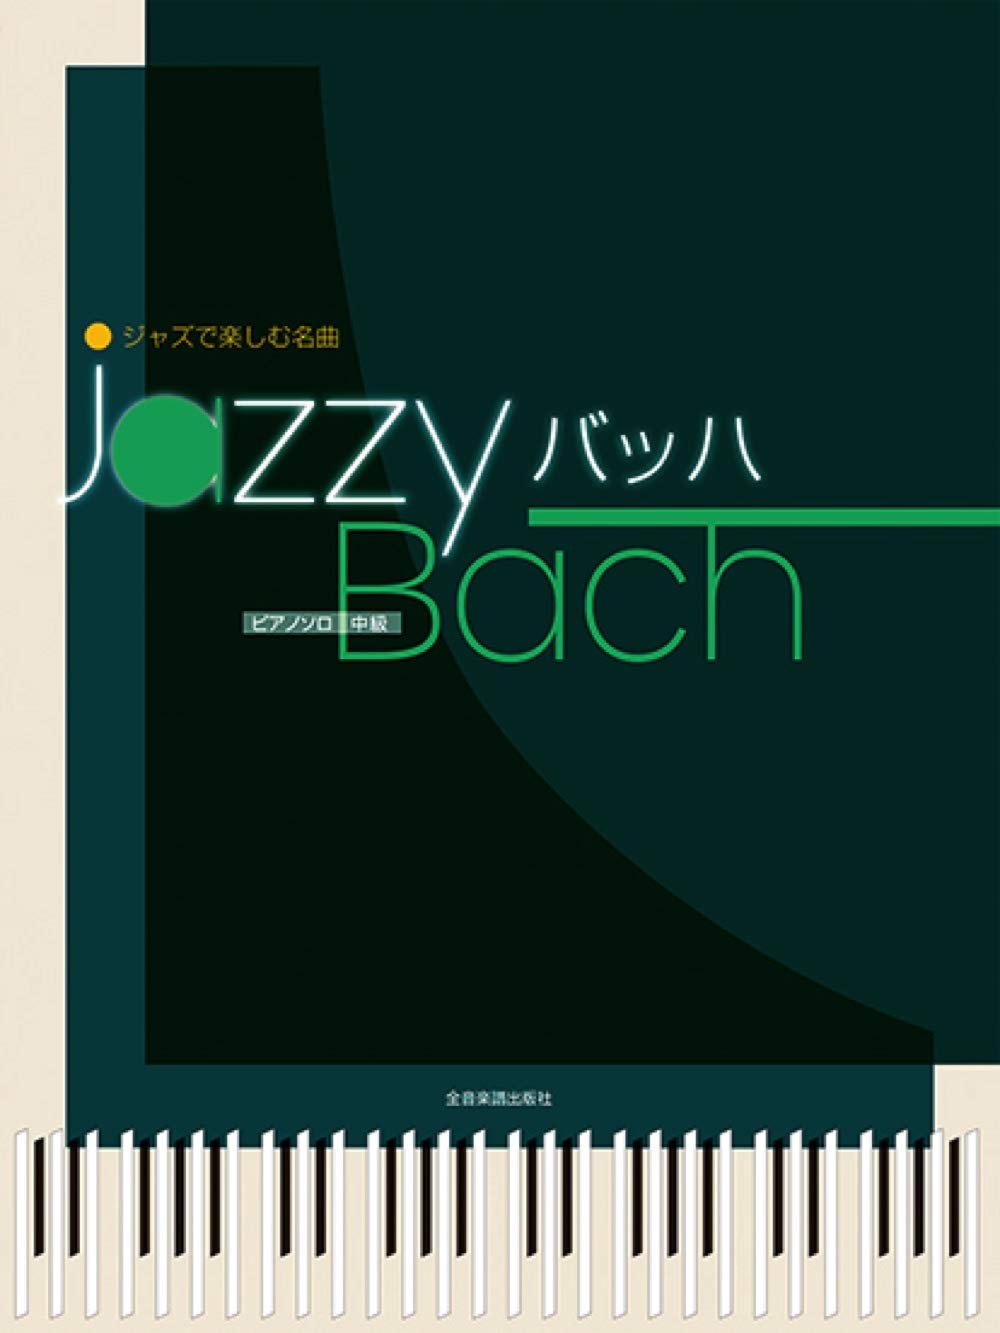 Jazzy Bach: Jazzed Up Versions of Bach Classics Piano Solo